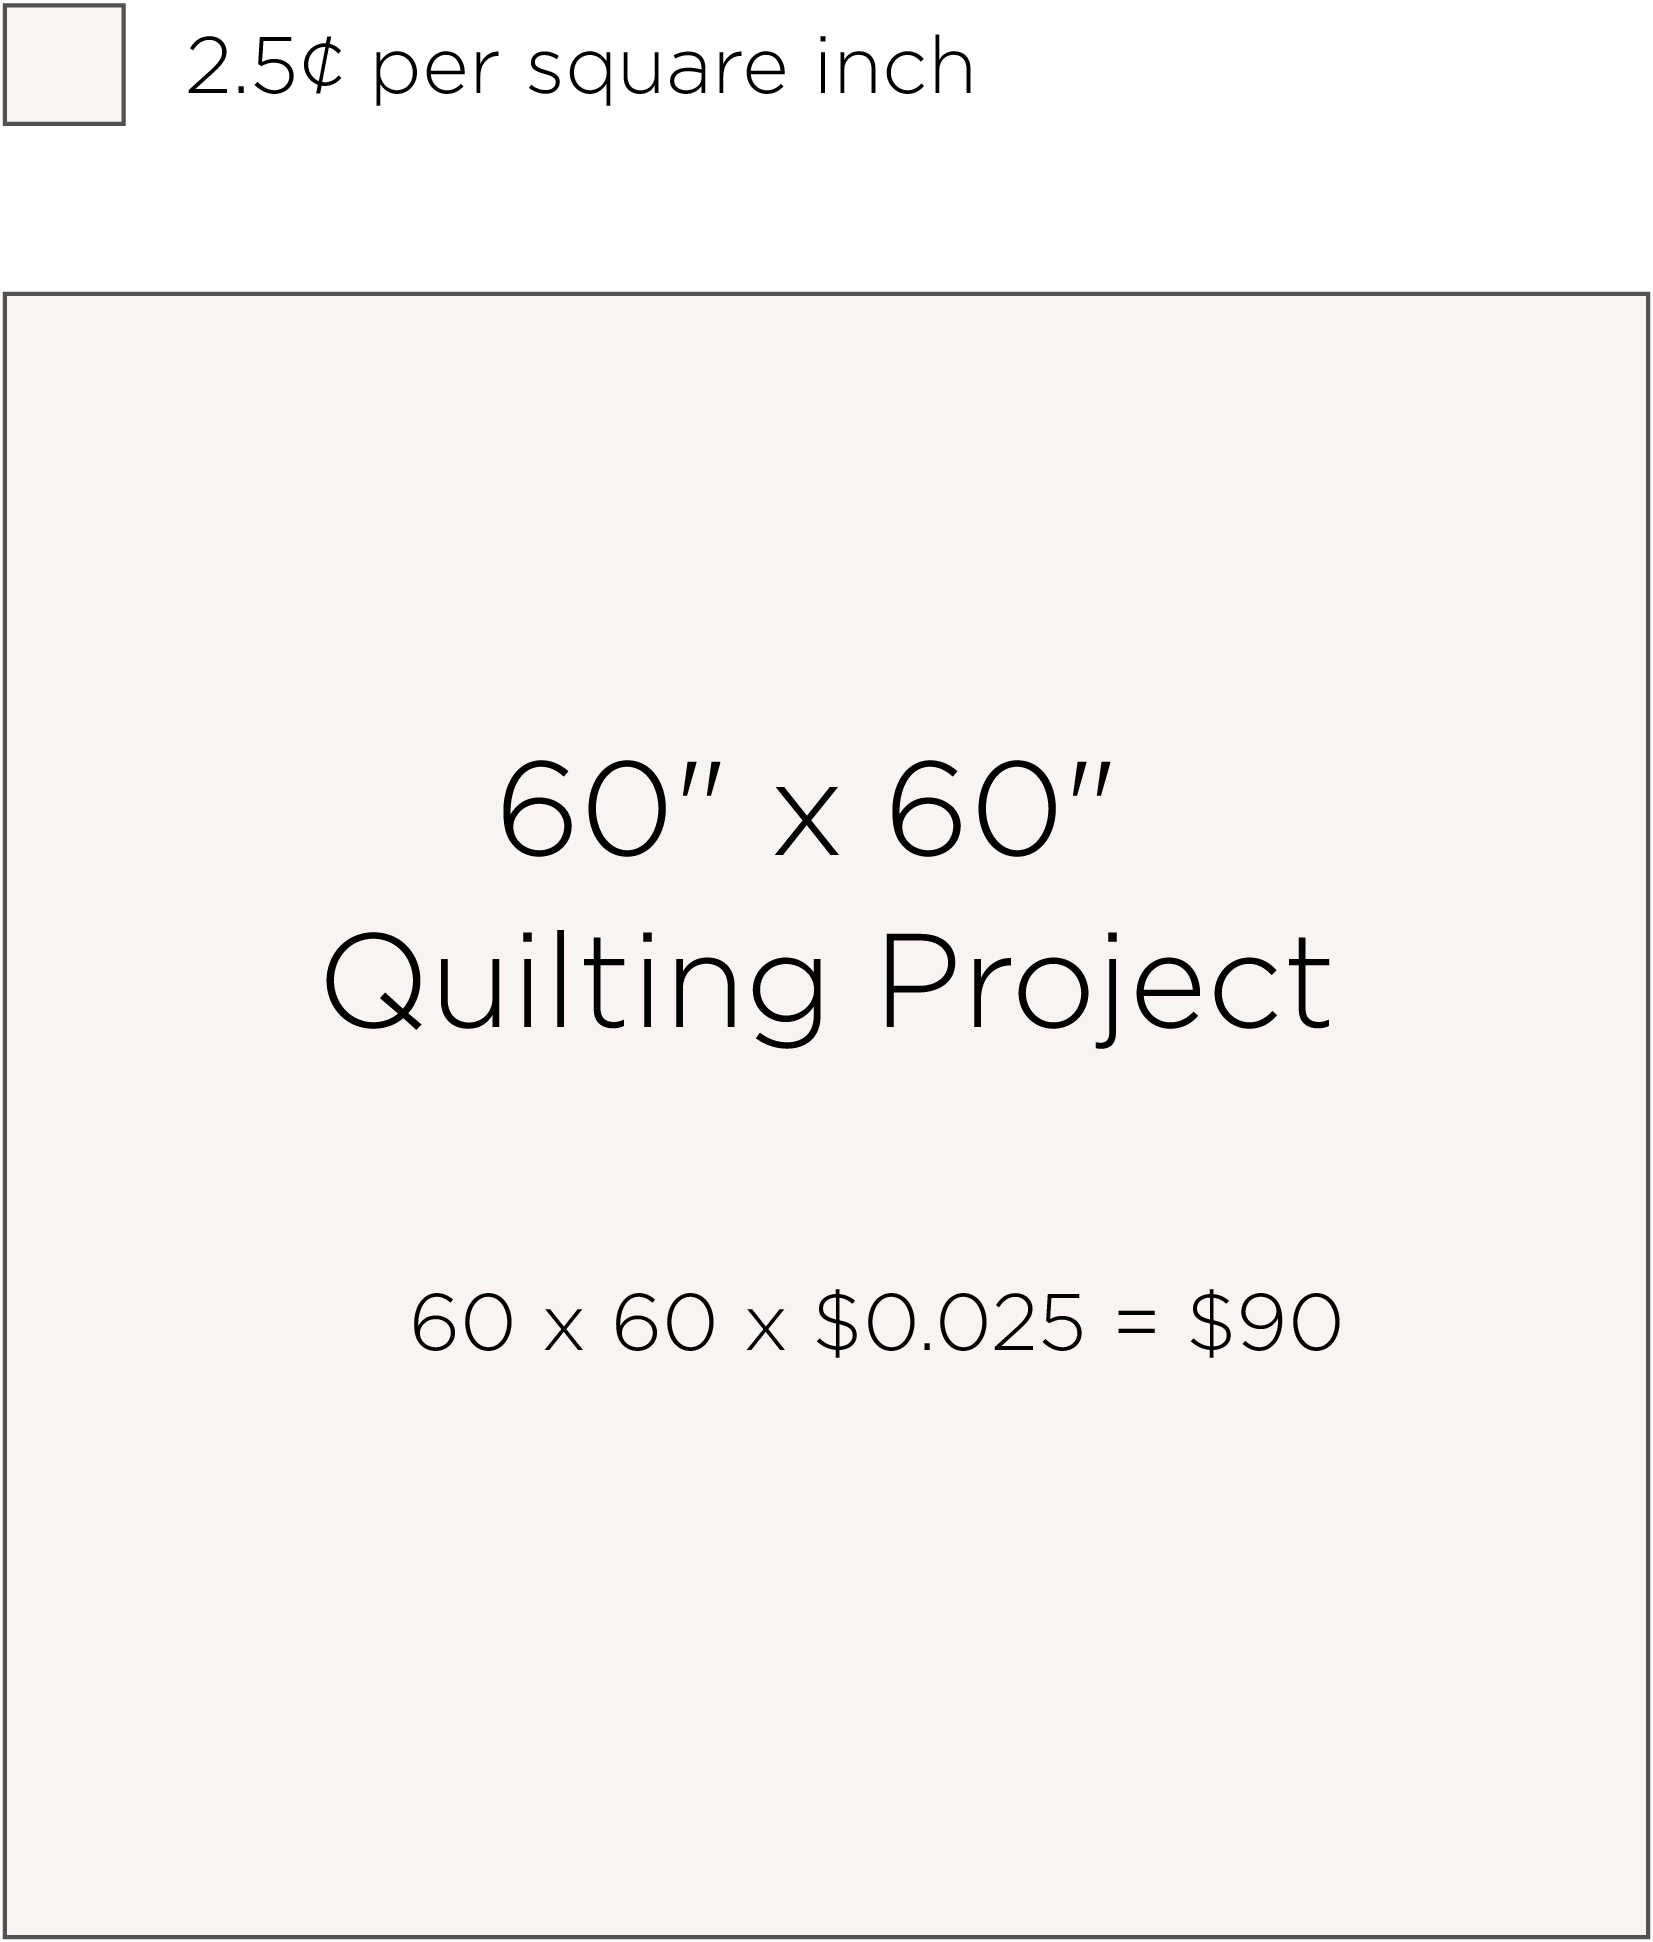 How much will the quilt cost@4x